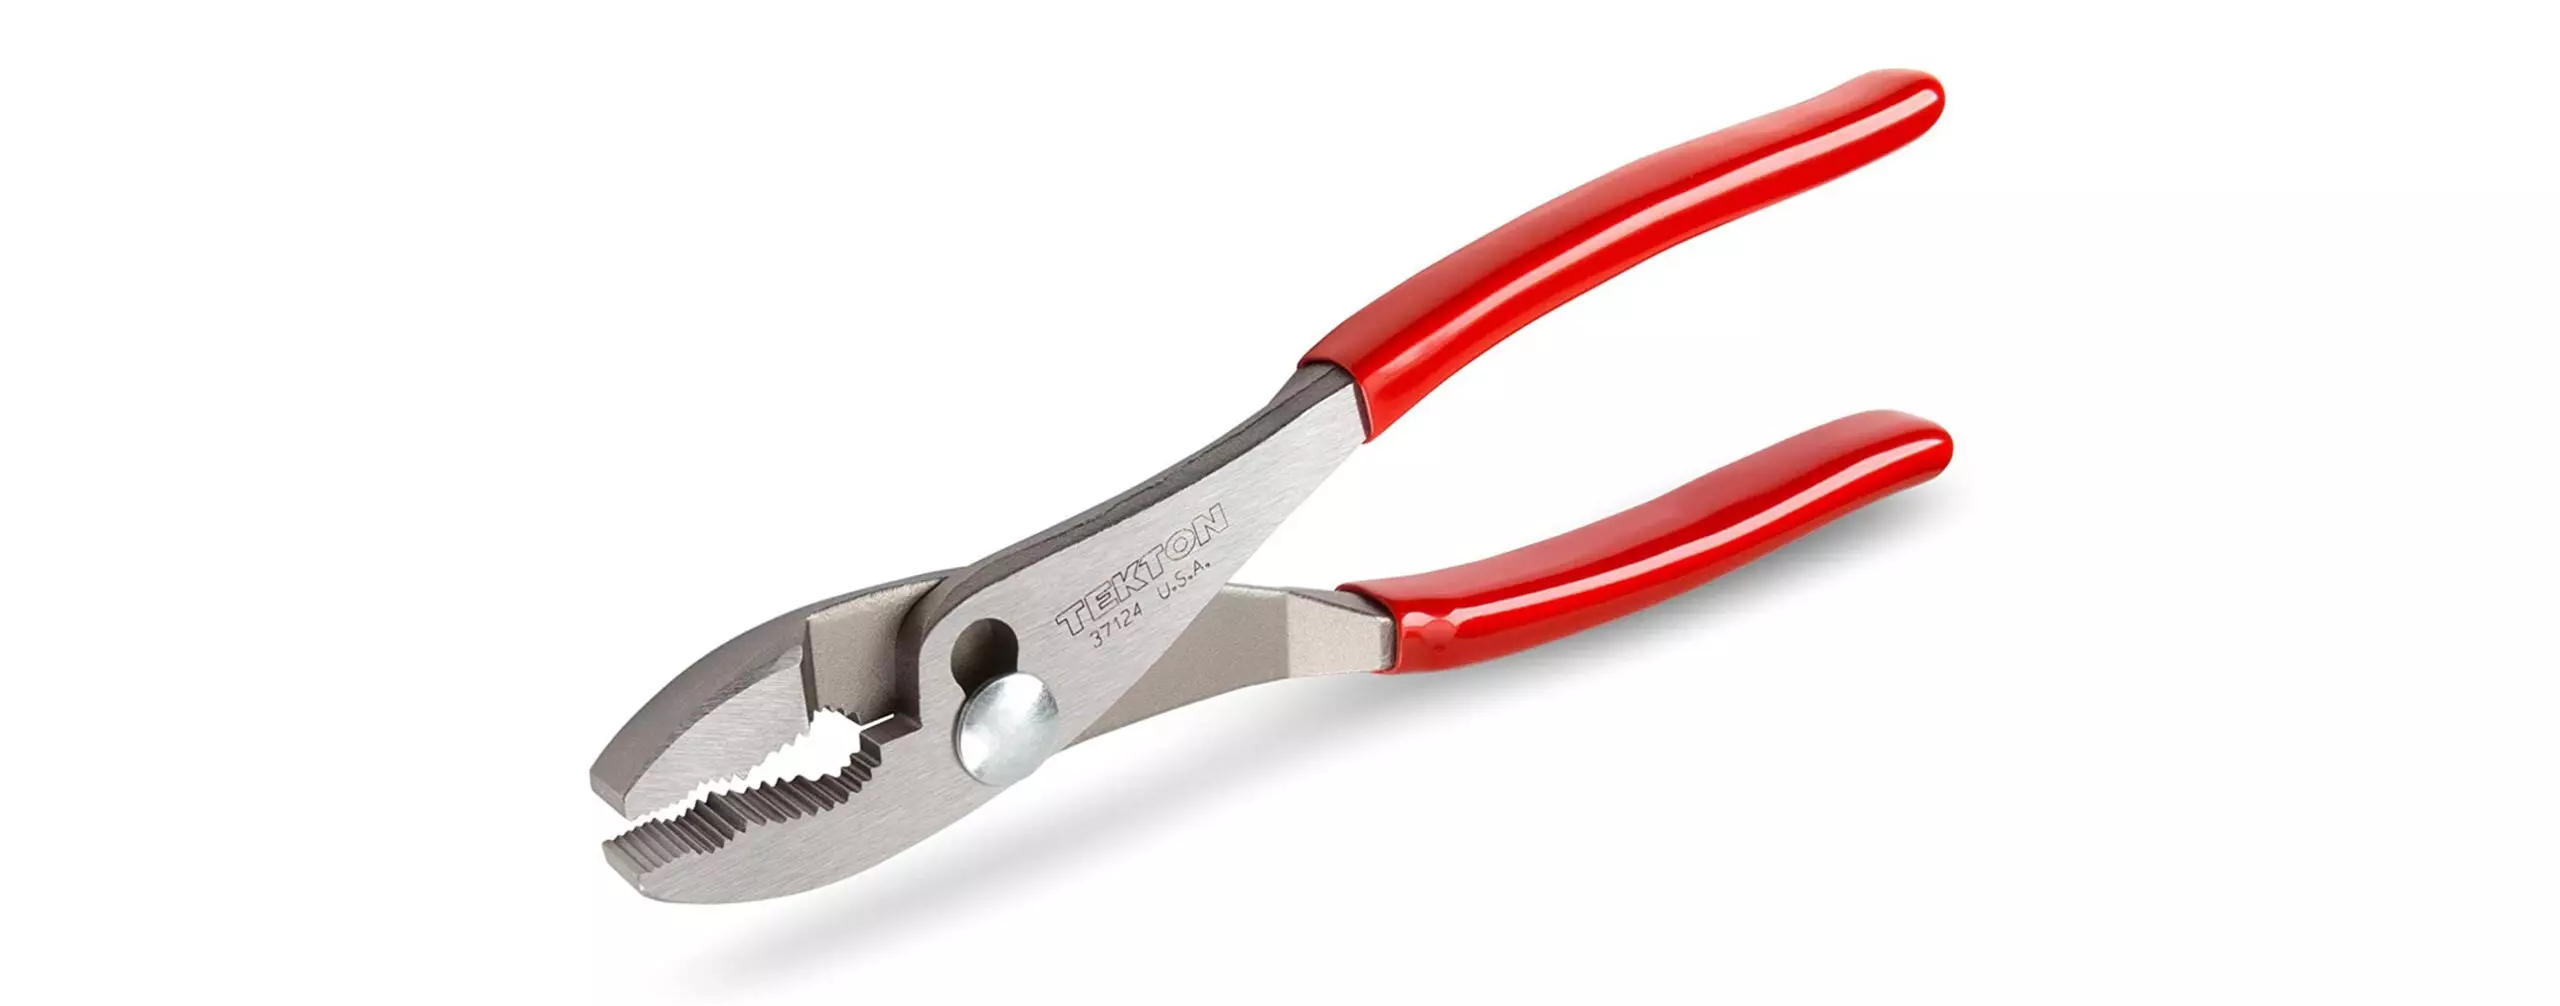 The Best Slip Joint Pliers (Review and Buying Guide) in 2022